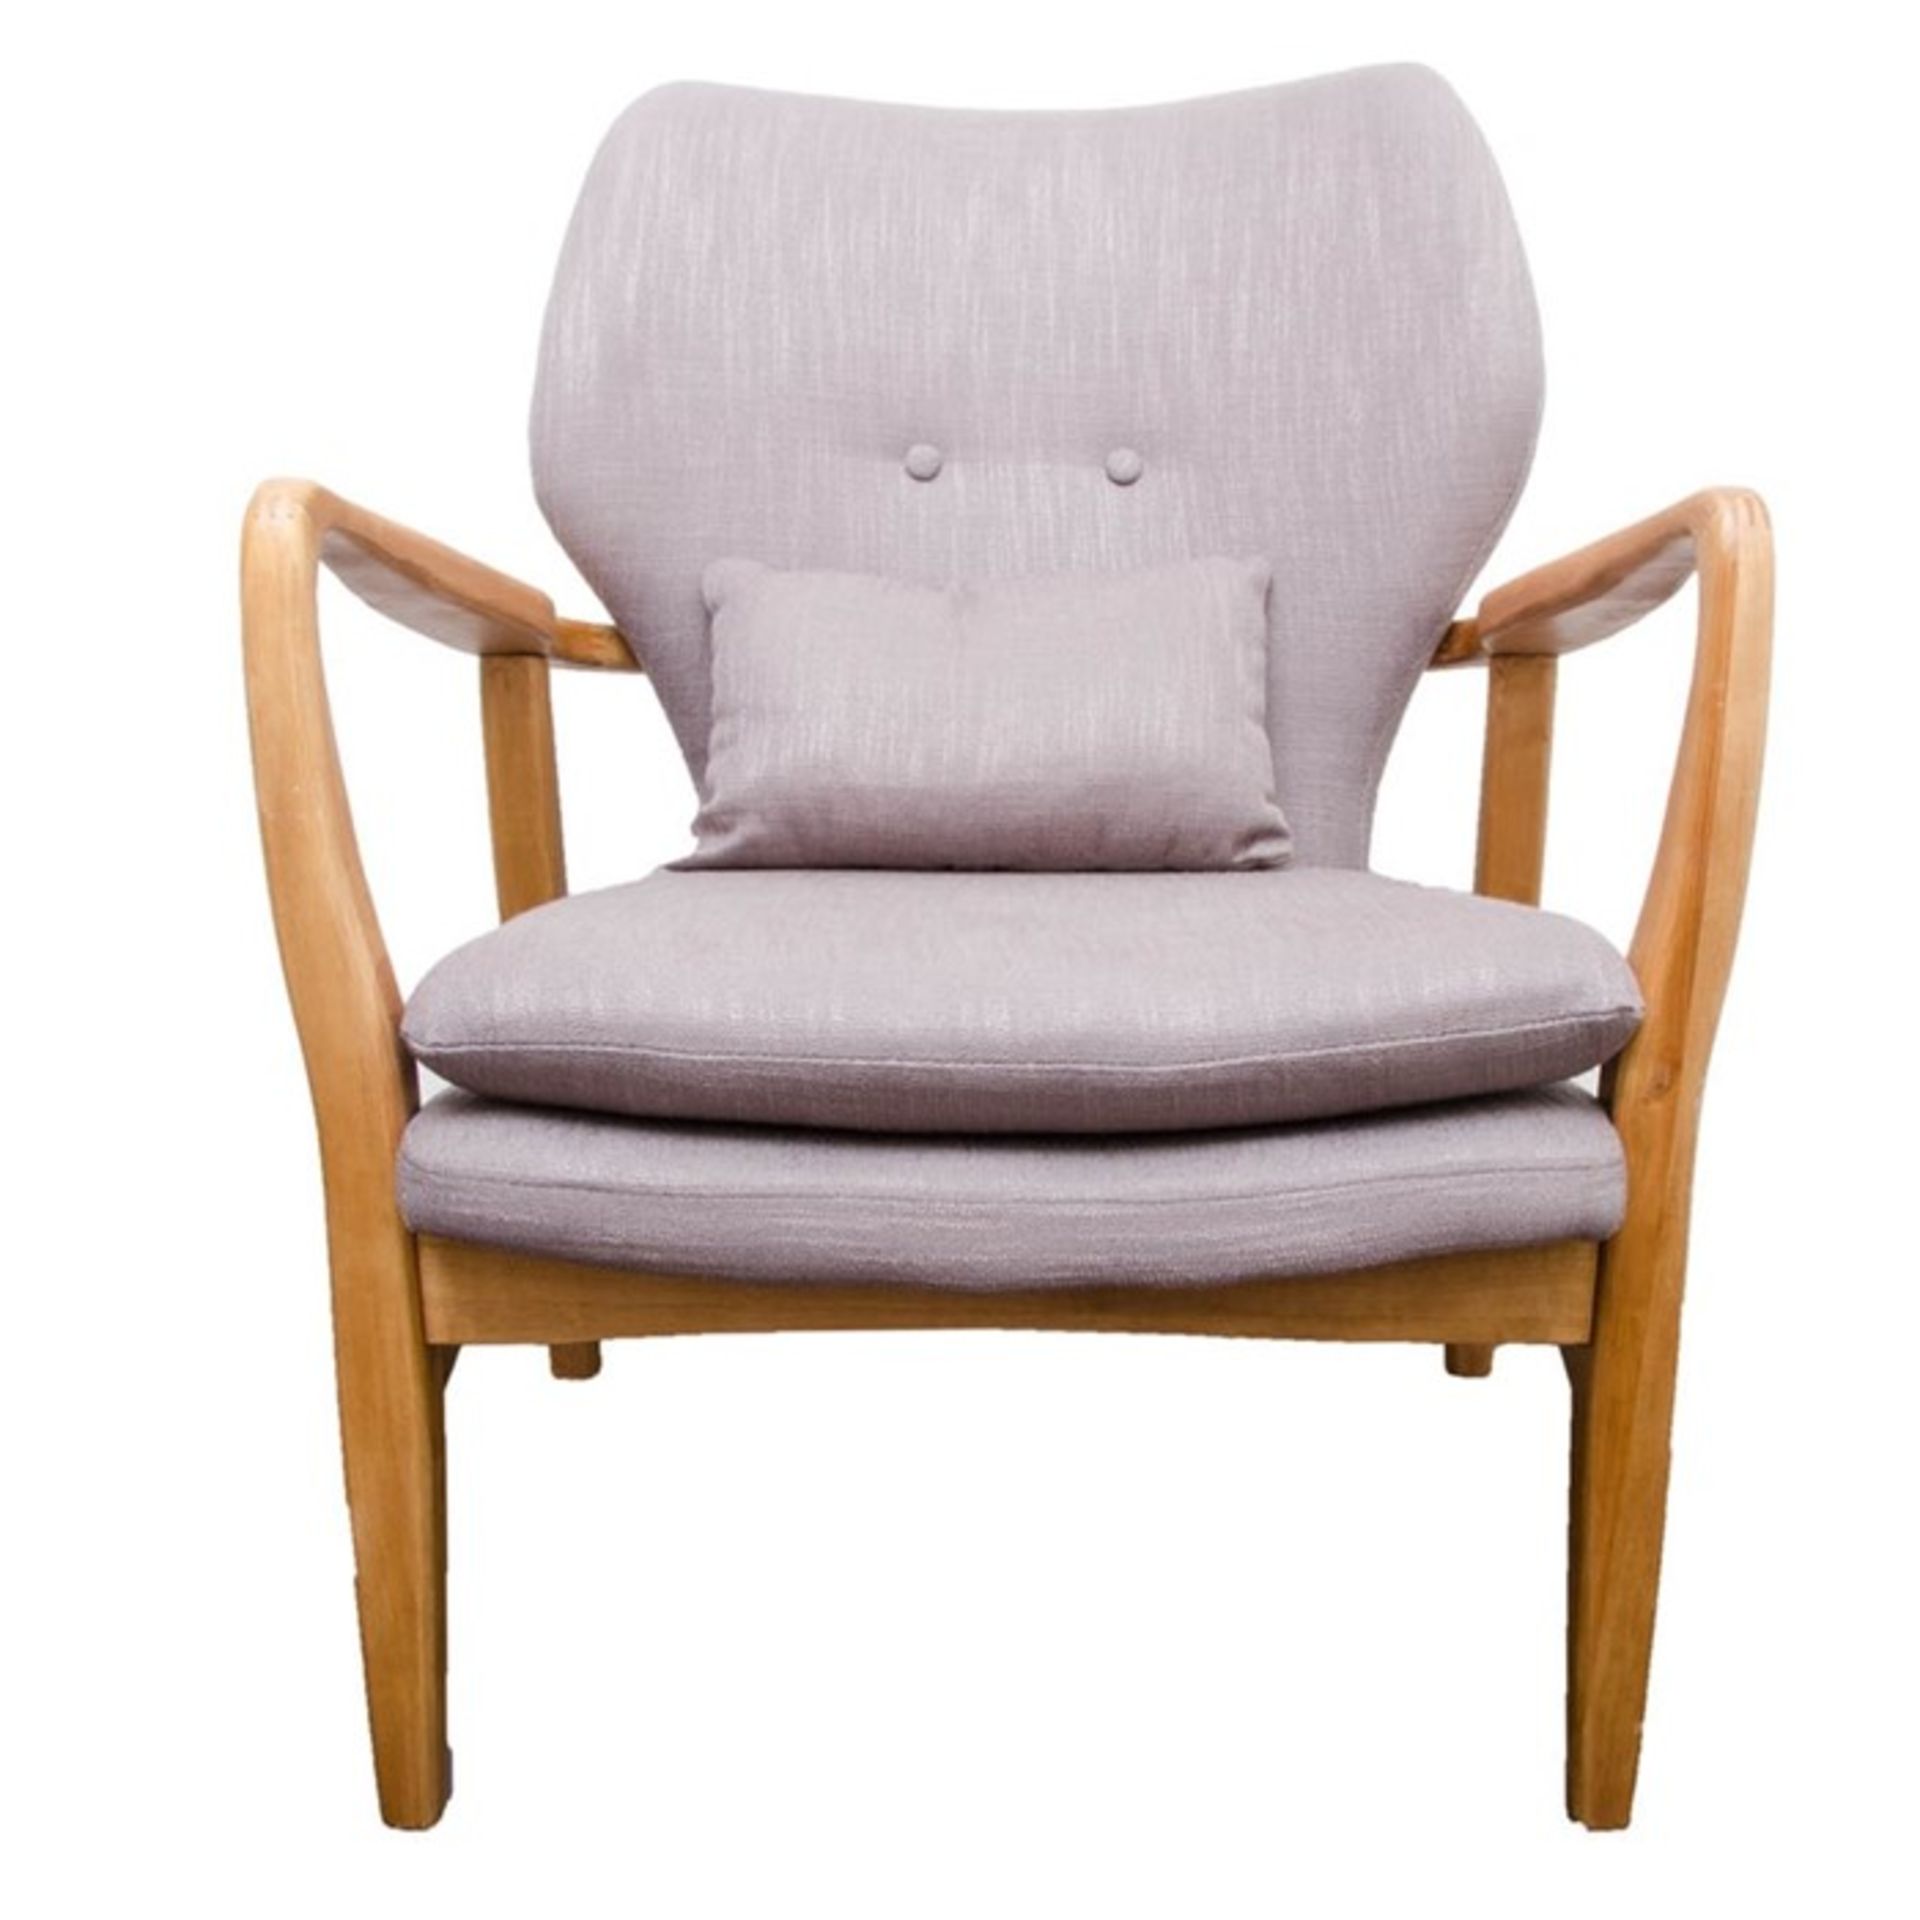 ONE LOT TO CONTAIN A NOBLE HOME ARMCHAIR IN LIGHT GREY / GRADE A LIKE NEW / RRP £ 100.00